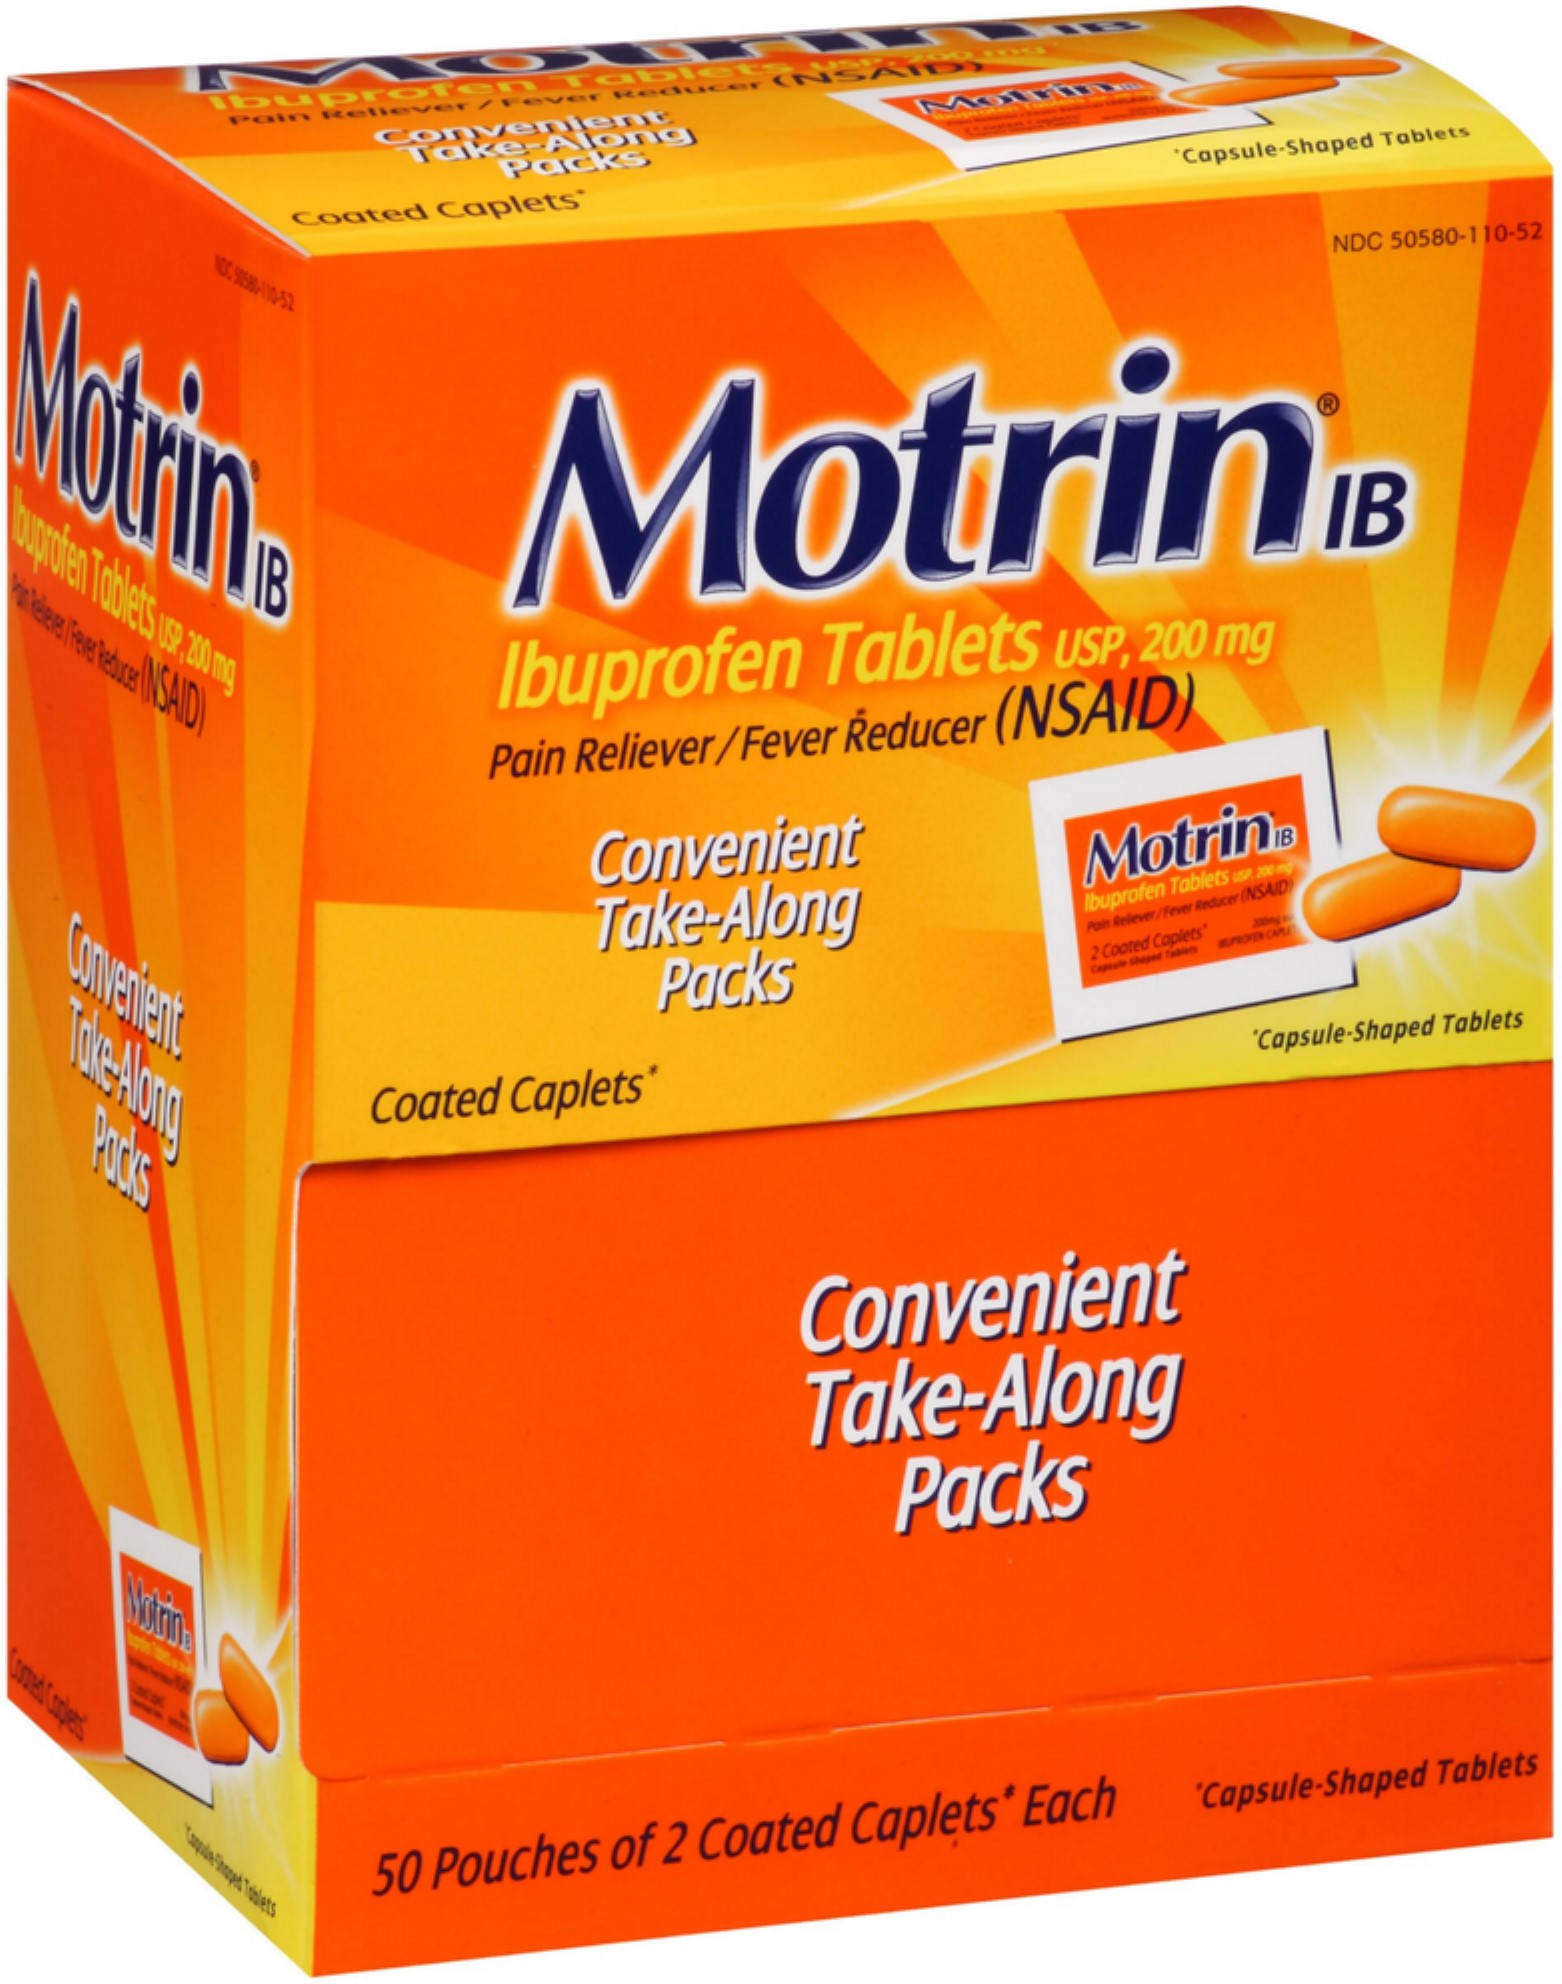 Motrin Ibuprofen Pain Relief/Fever Reducer Tablets, 2 Per Pack, 50 ea (Pack of 6) - image 1 of 1